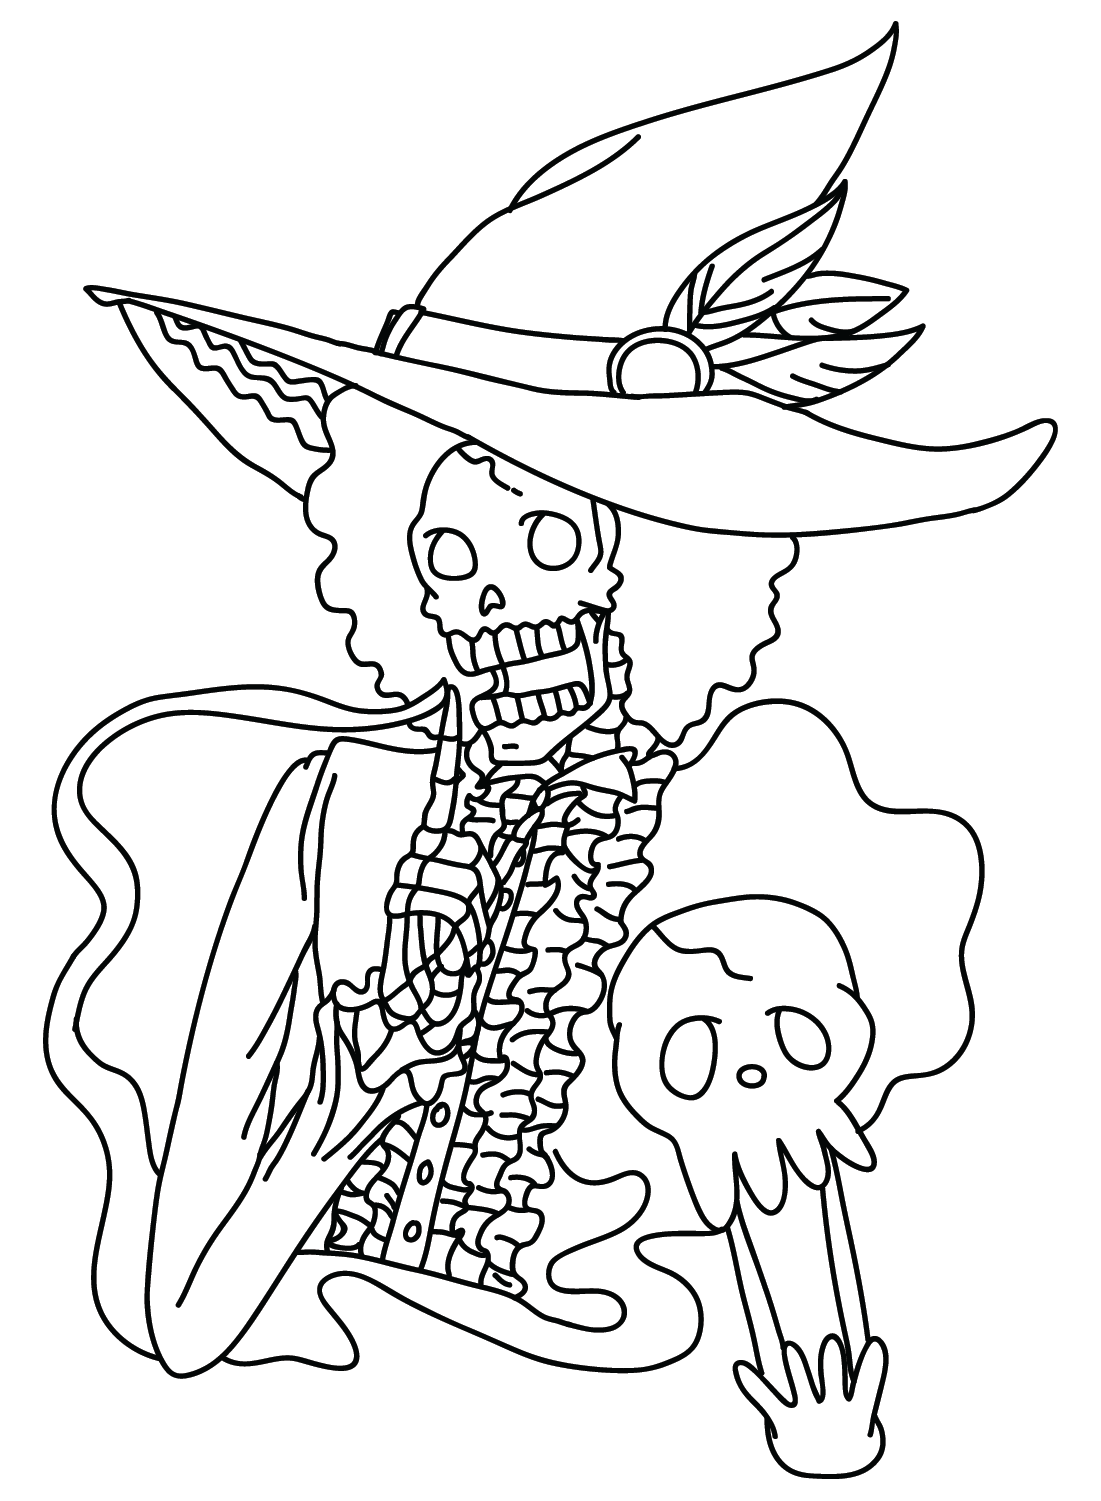 Brook Coloring Page to Print from Brook